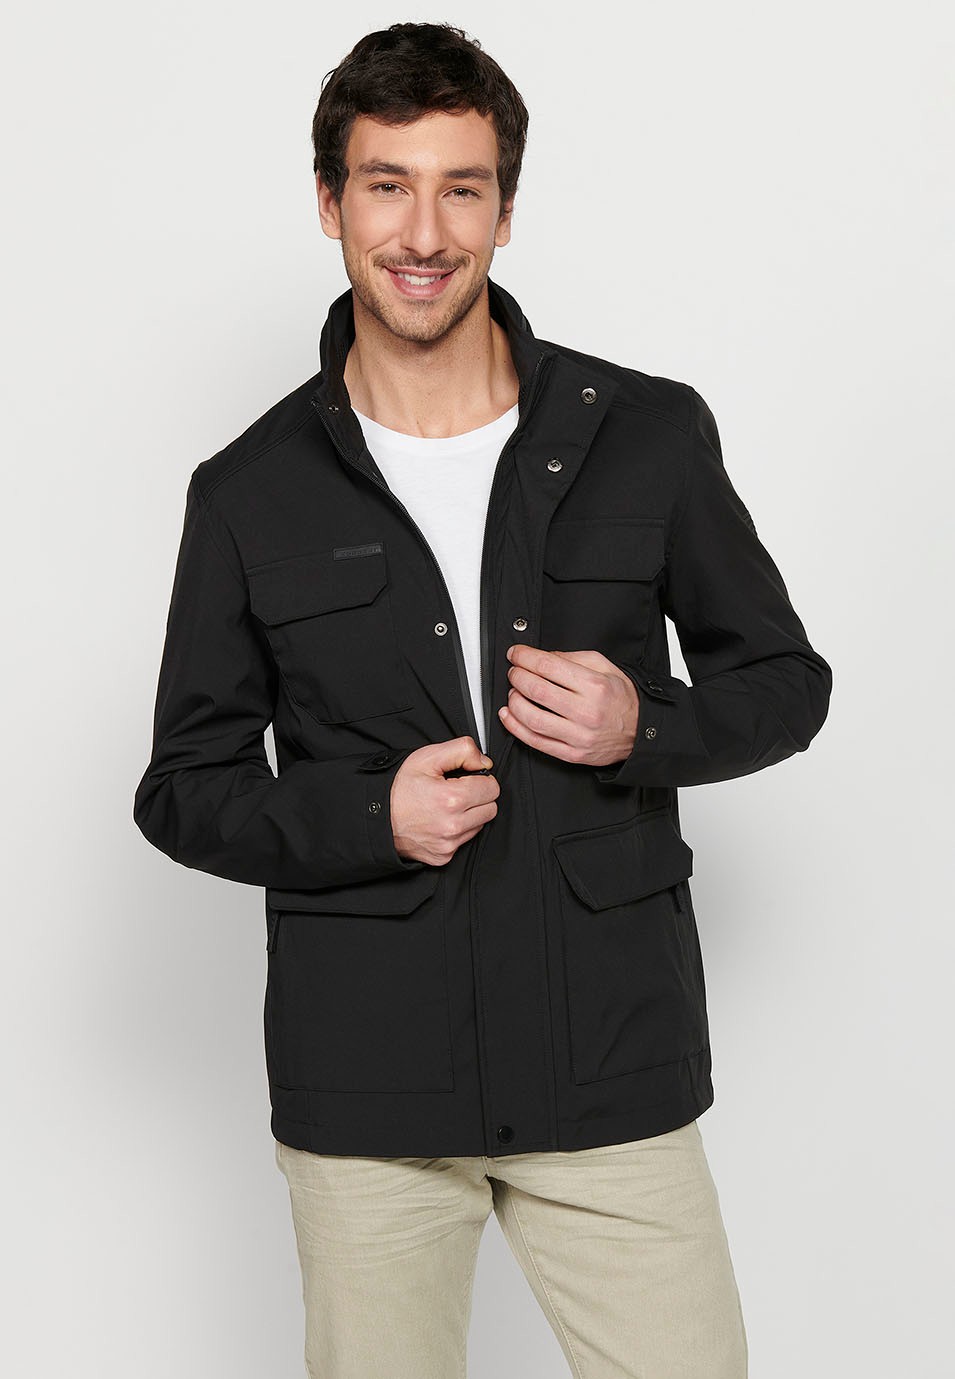 Long Black High Neck Windbreaker Jacket with Front Zipper Closure and Four Flap Pockets for Men 9